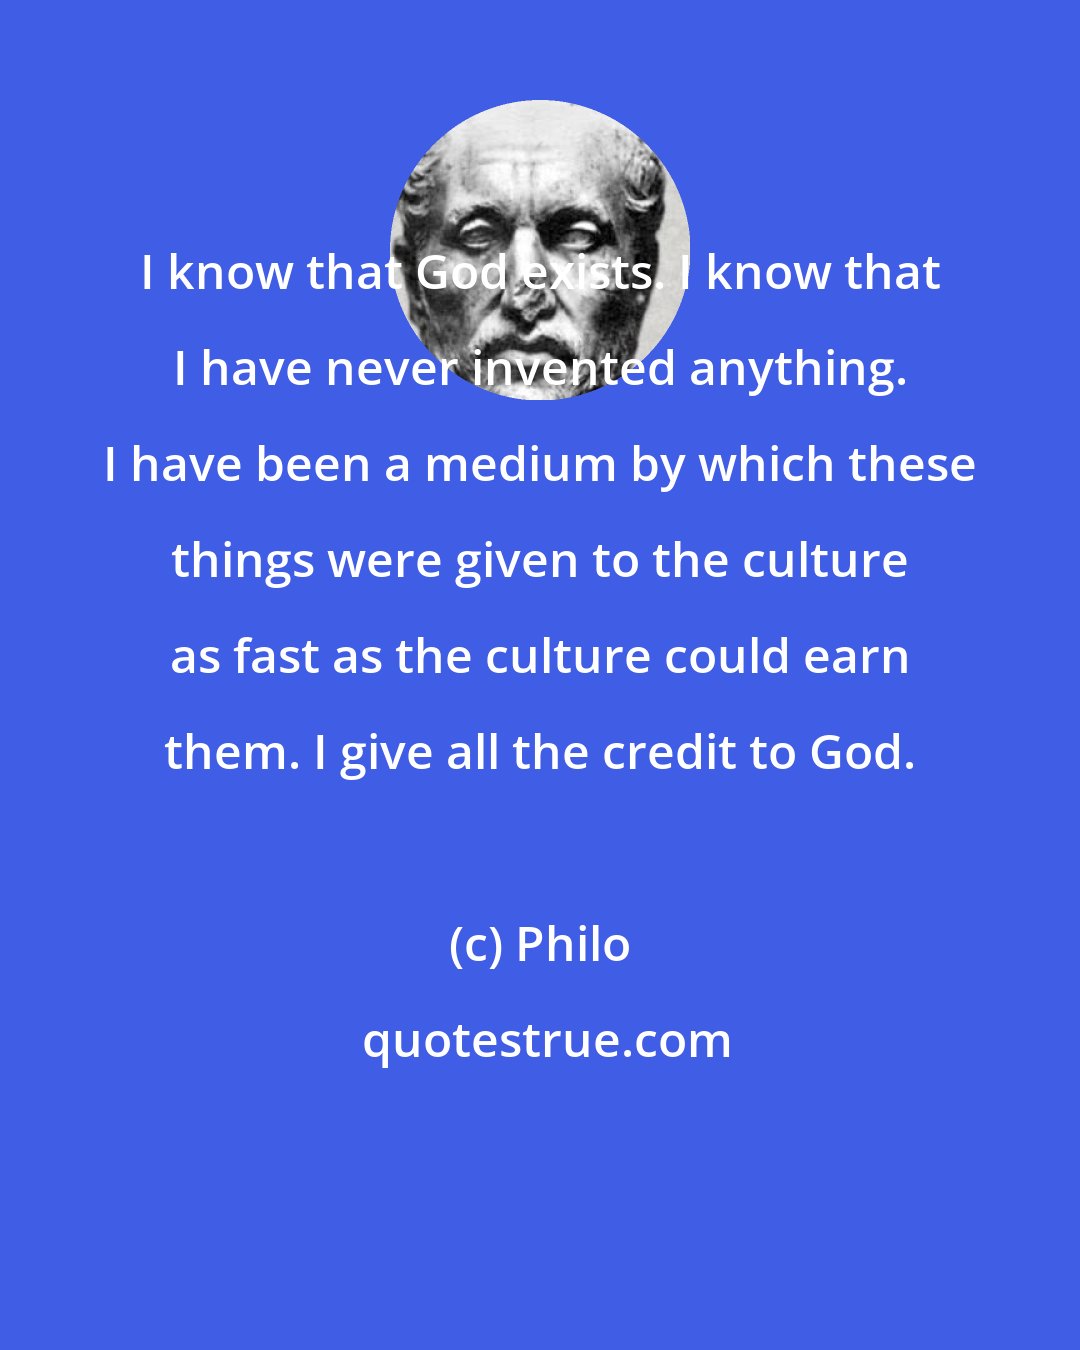 Philo: I know that God exists. I know that I have never invented anything. I have been a medium by which these things were given to the culture as fast as the culture could earn them. I give all the credit to God.